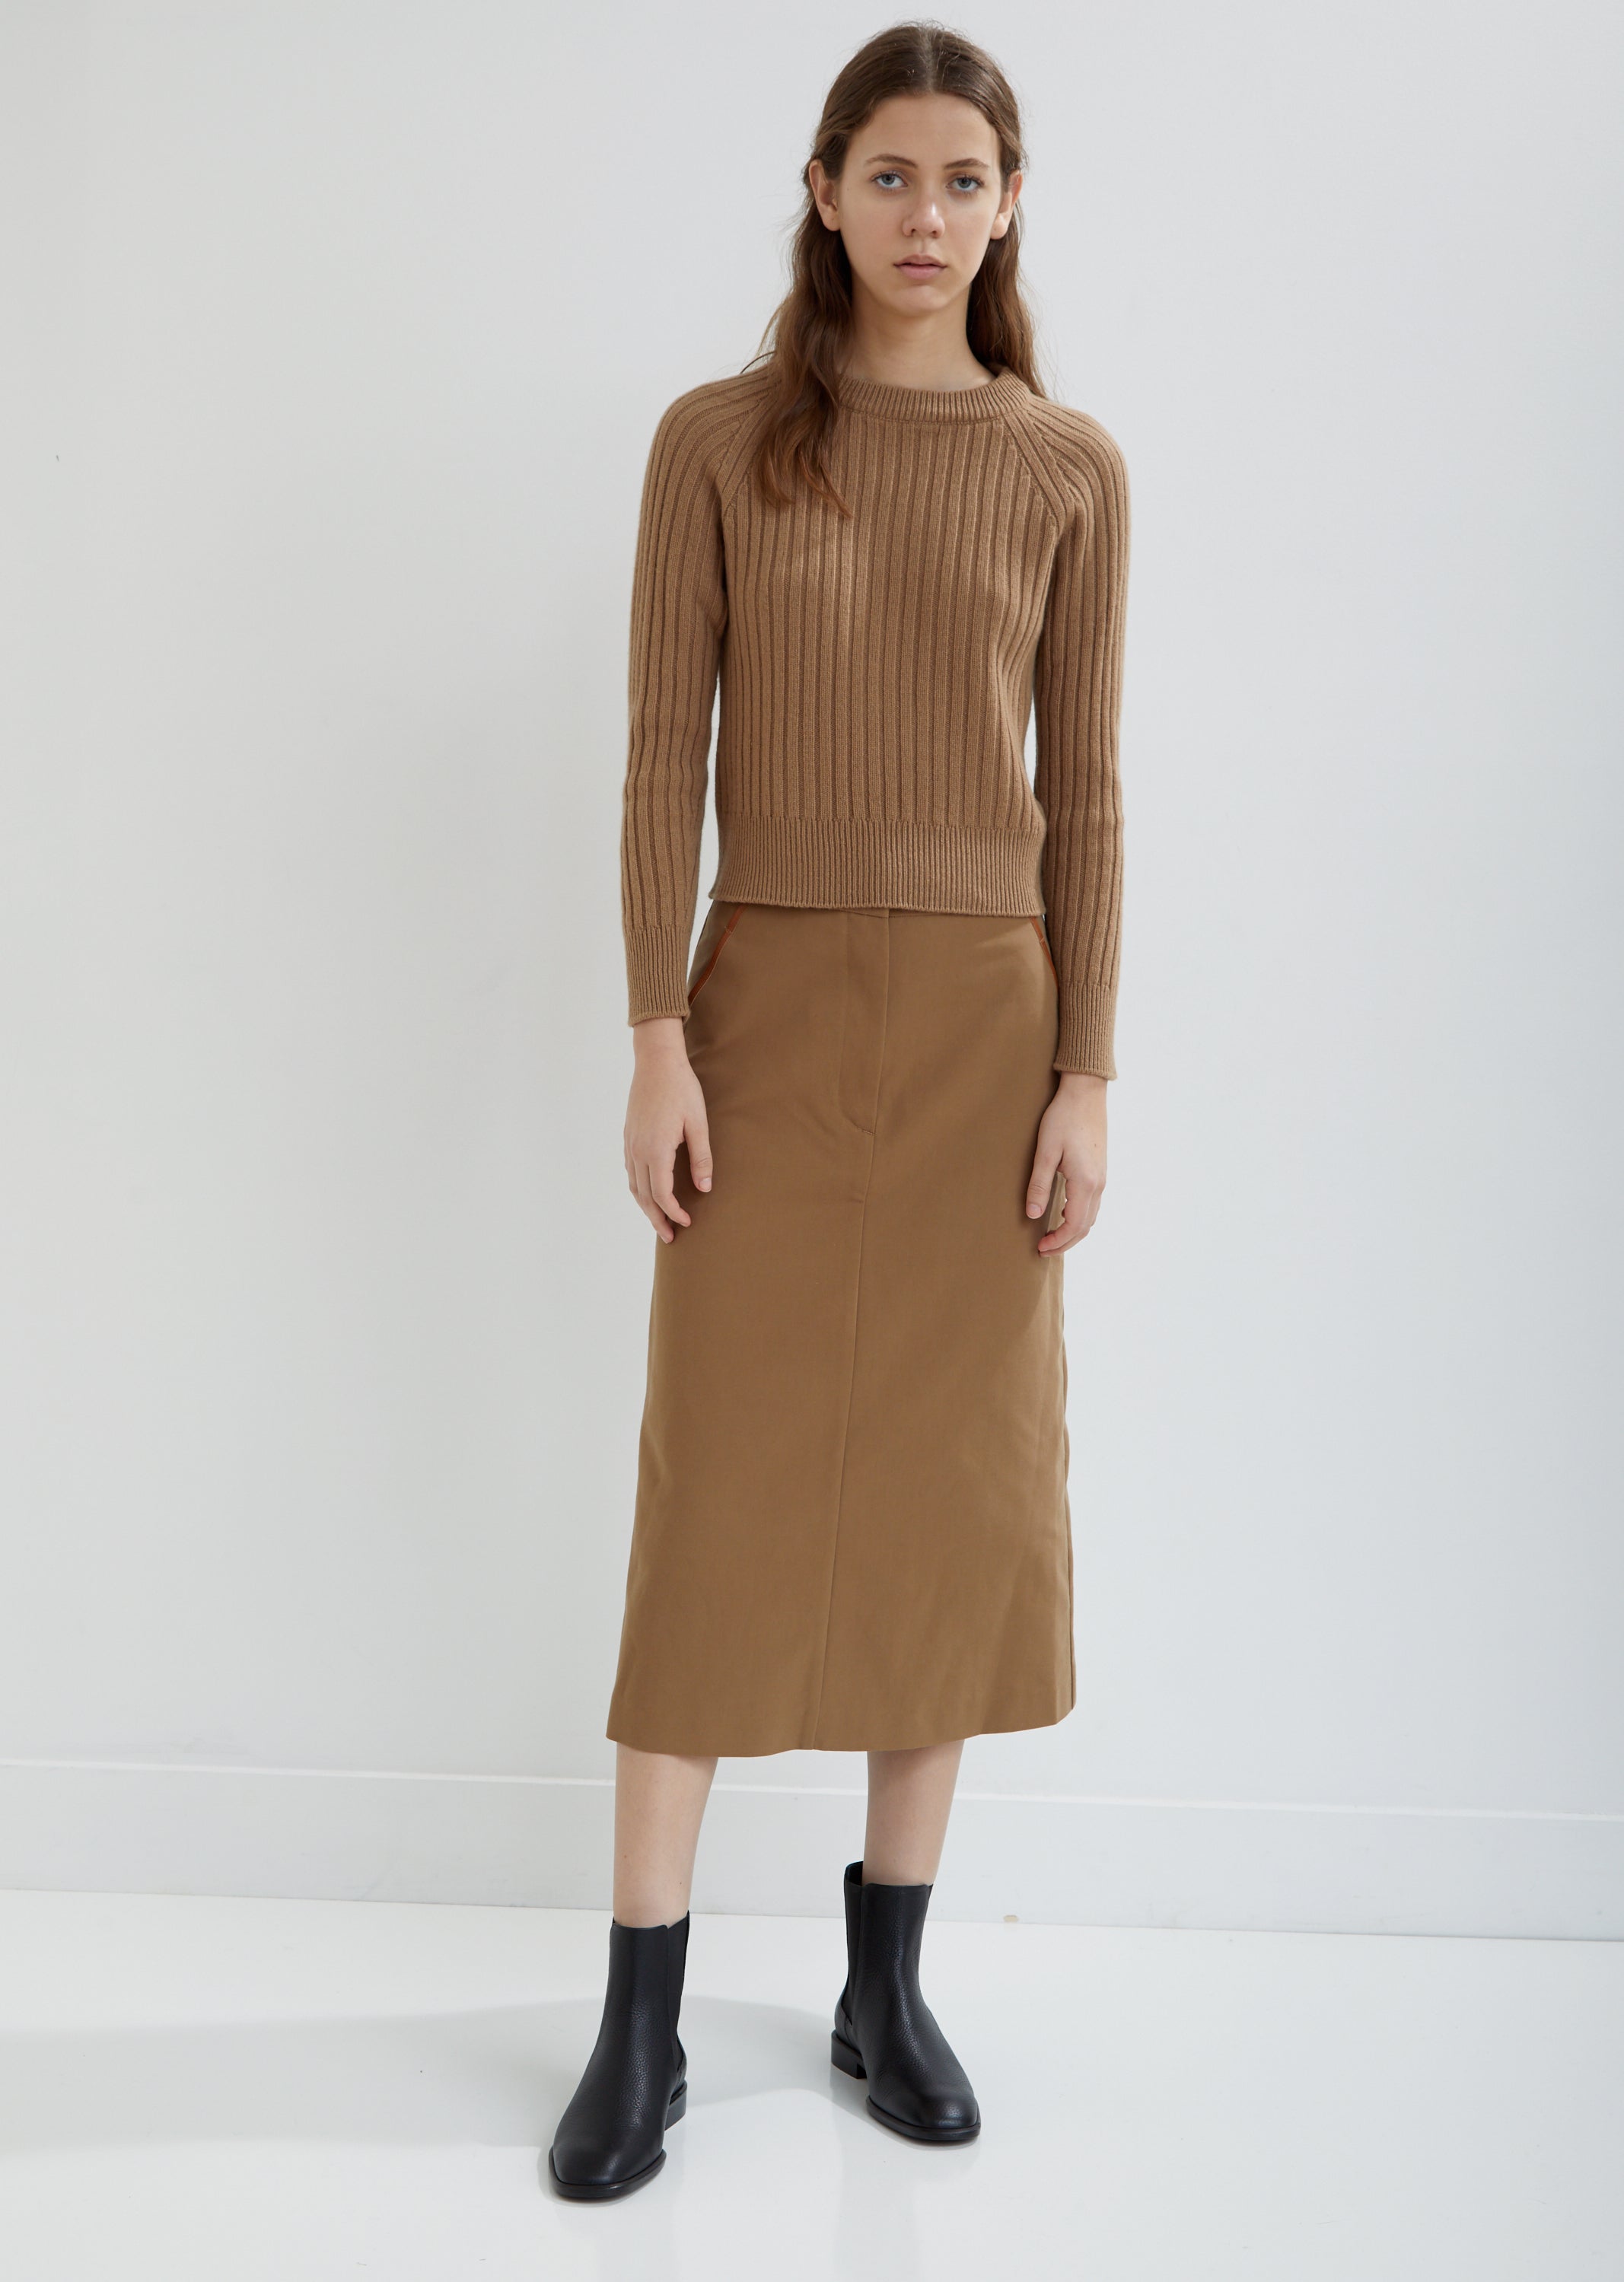 Essential Skirt with Leather Piping by Seya- La Garçonne